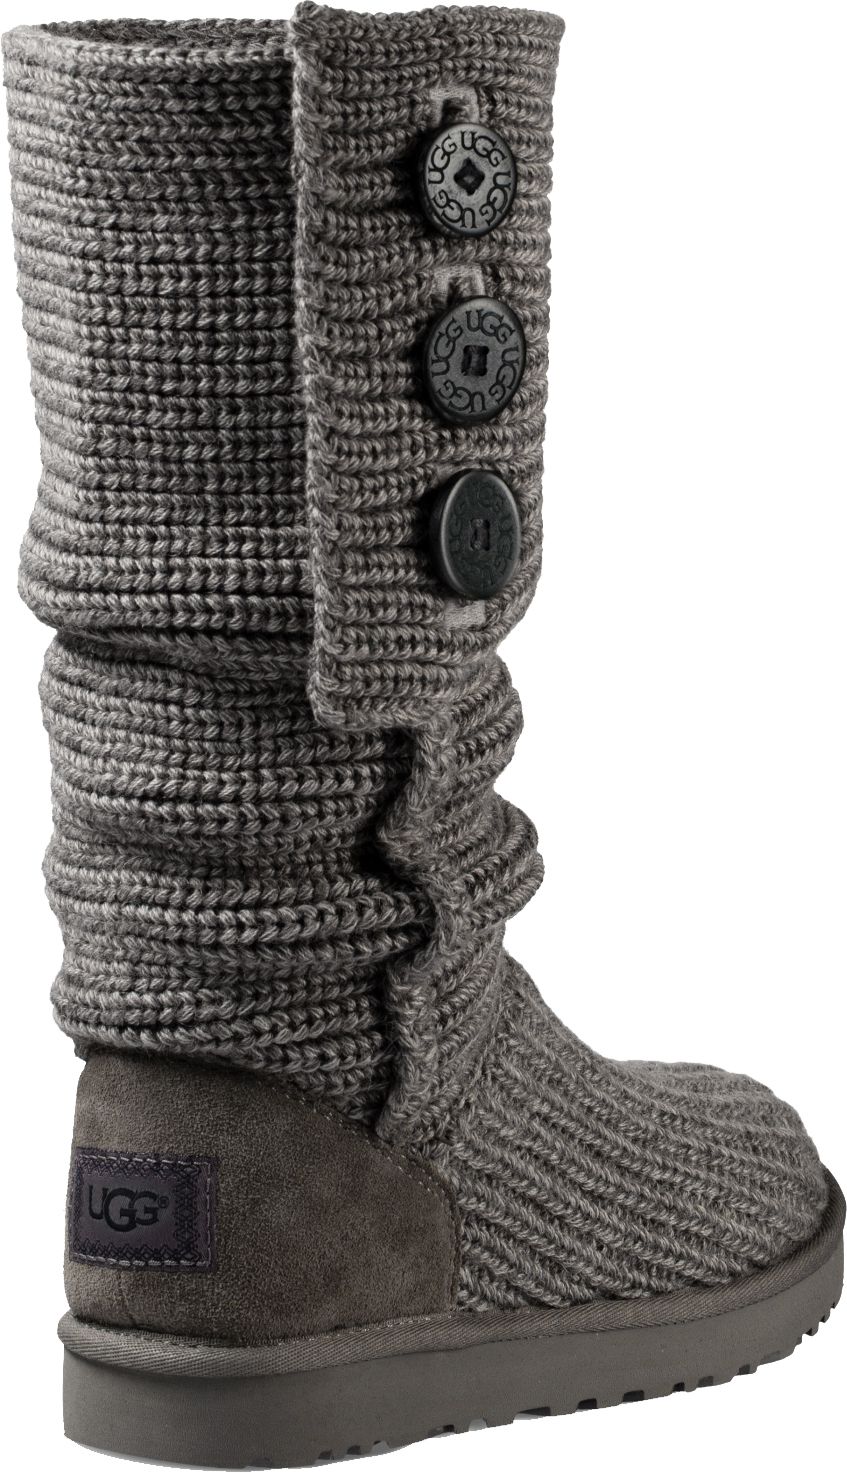 classic cardy uggs on sale